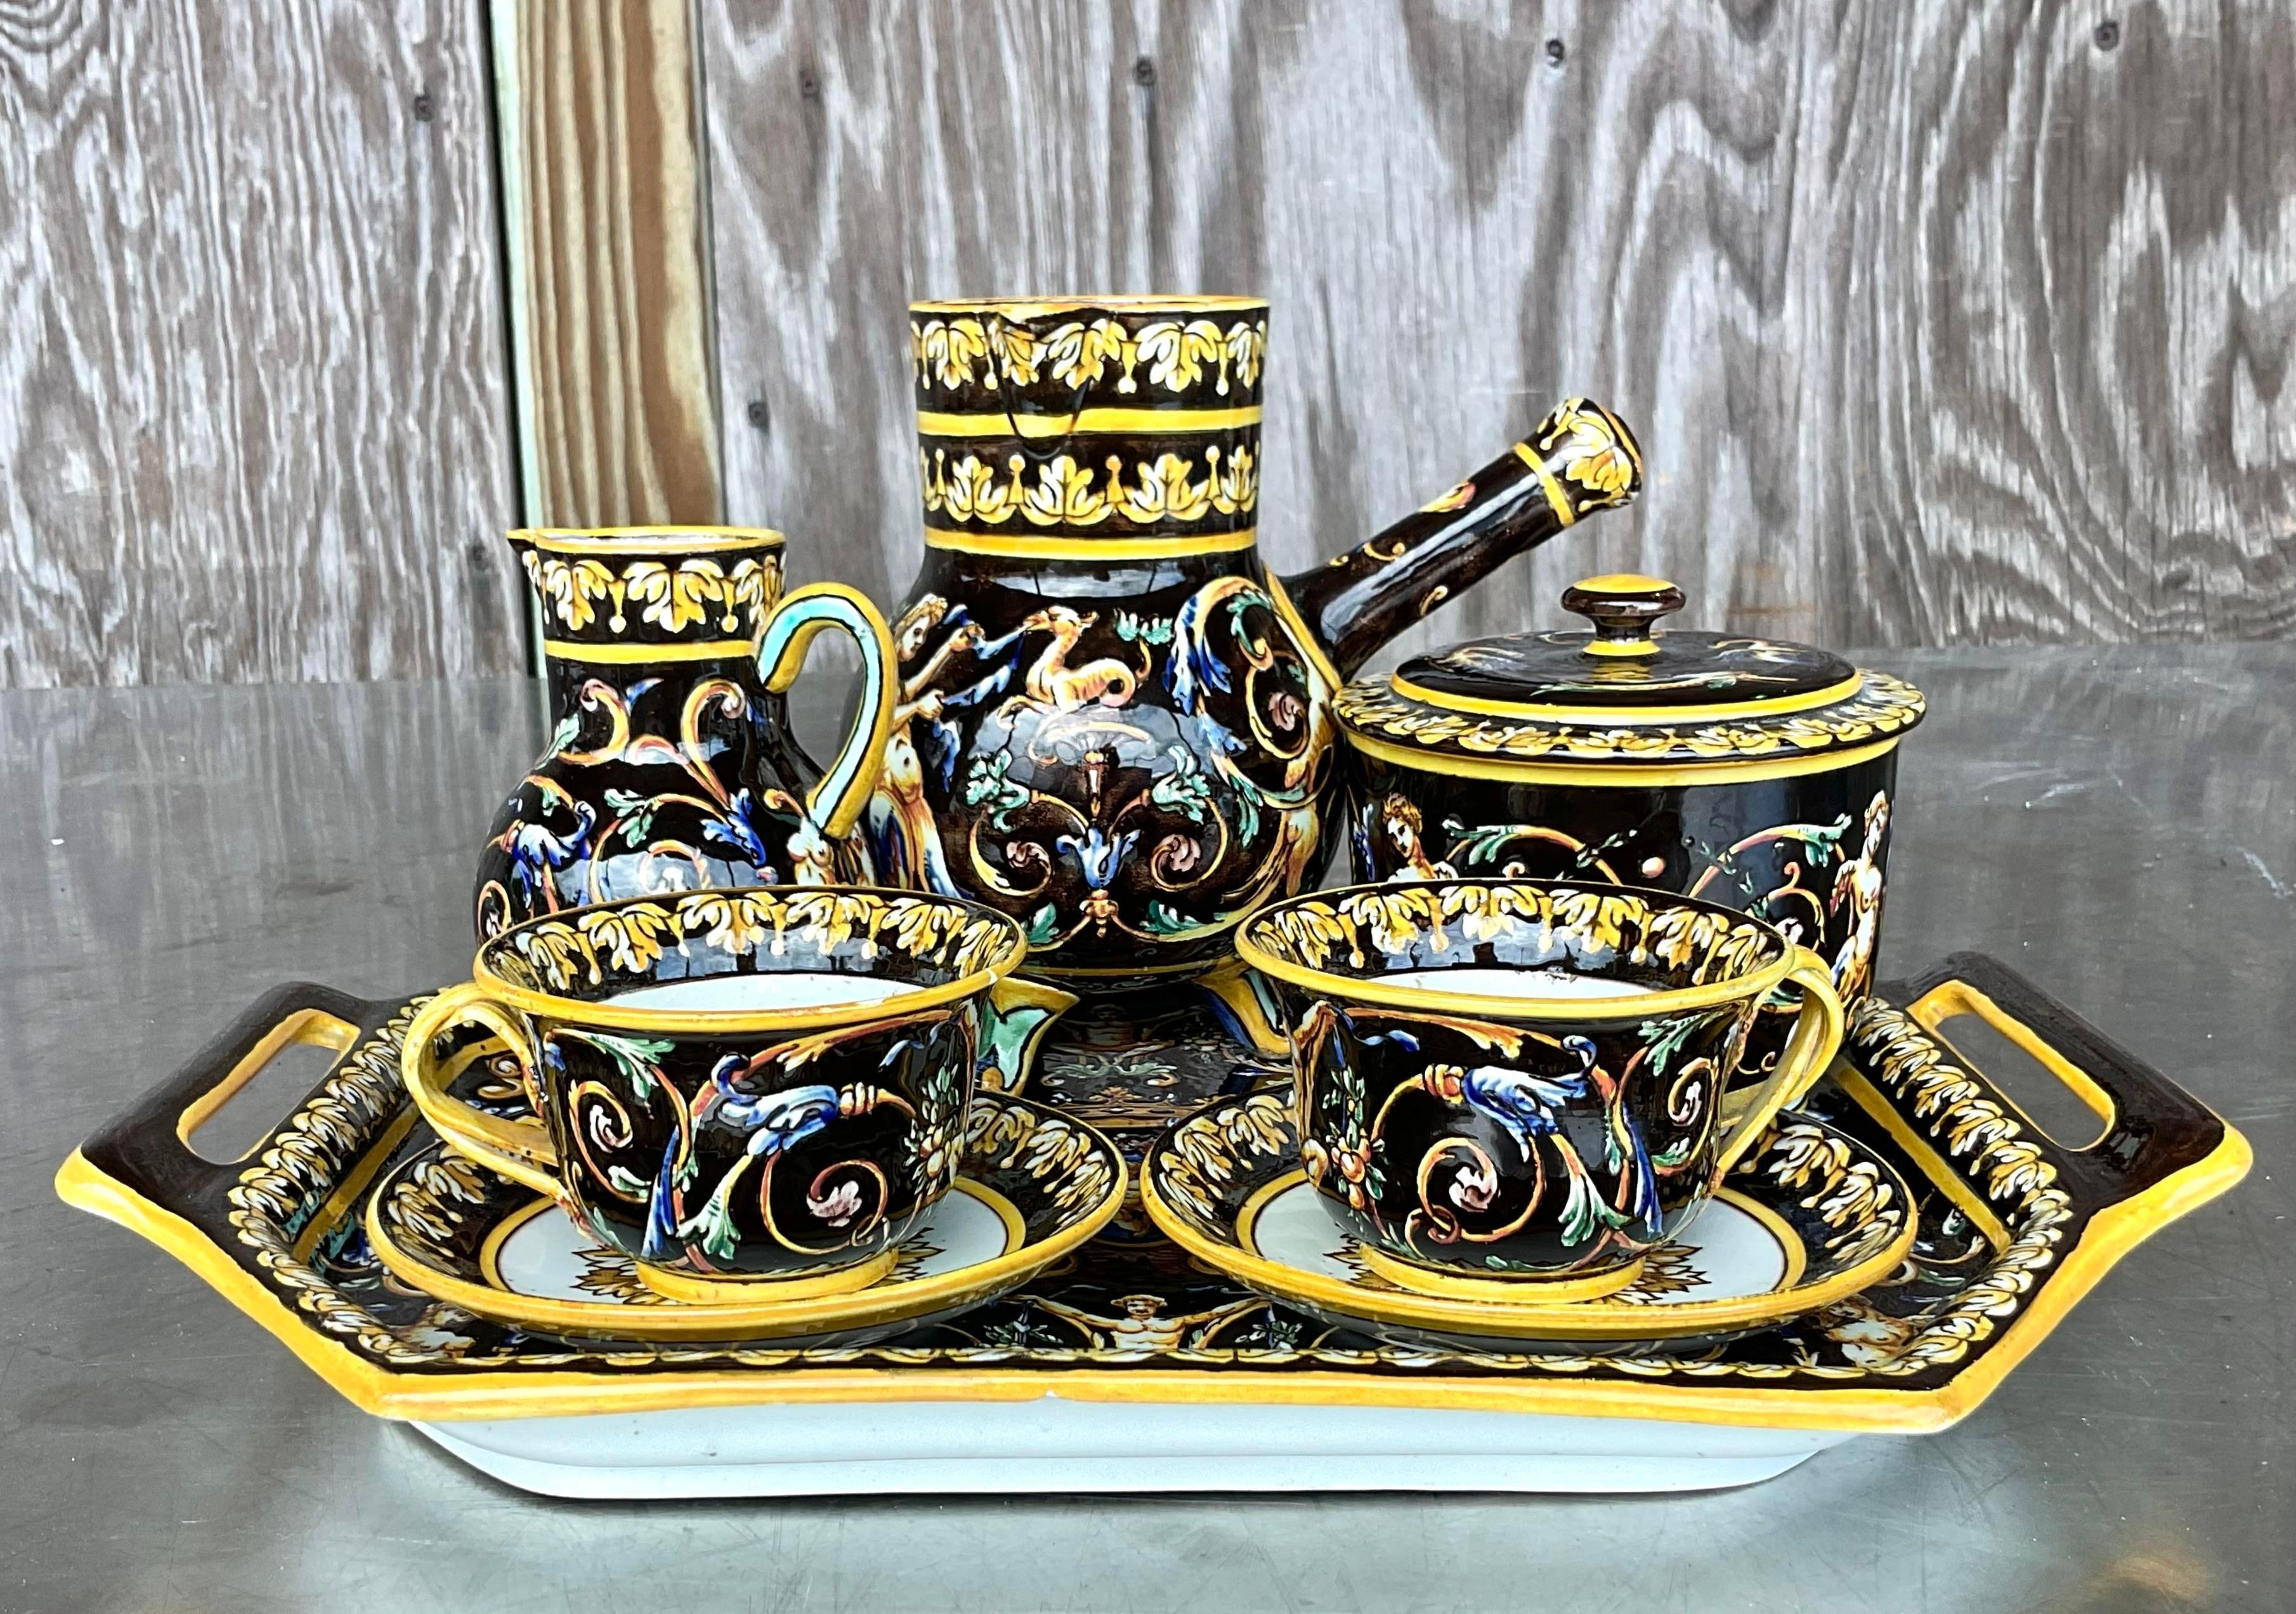 A stunning vintage Regency Chocolate set. Made by the coveted Gien group and marked on the bottom. A charming hand painted set open deep rich colors. Acquired from a Palm Beach estate.

Large pot - 5.5x3.5x5.5
Small pot - 3.5x 2.5x 4.5
Small lidded